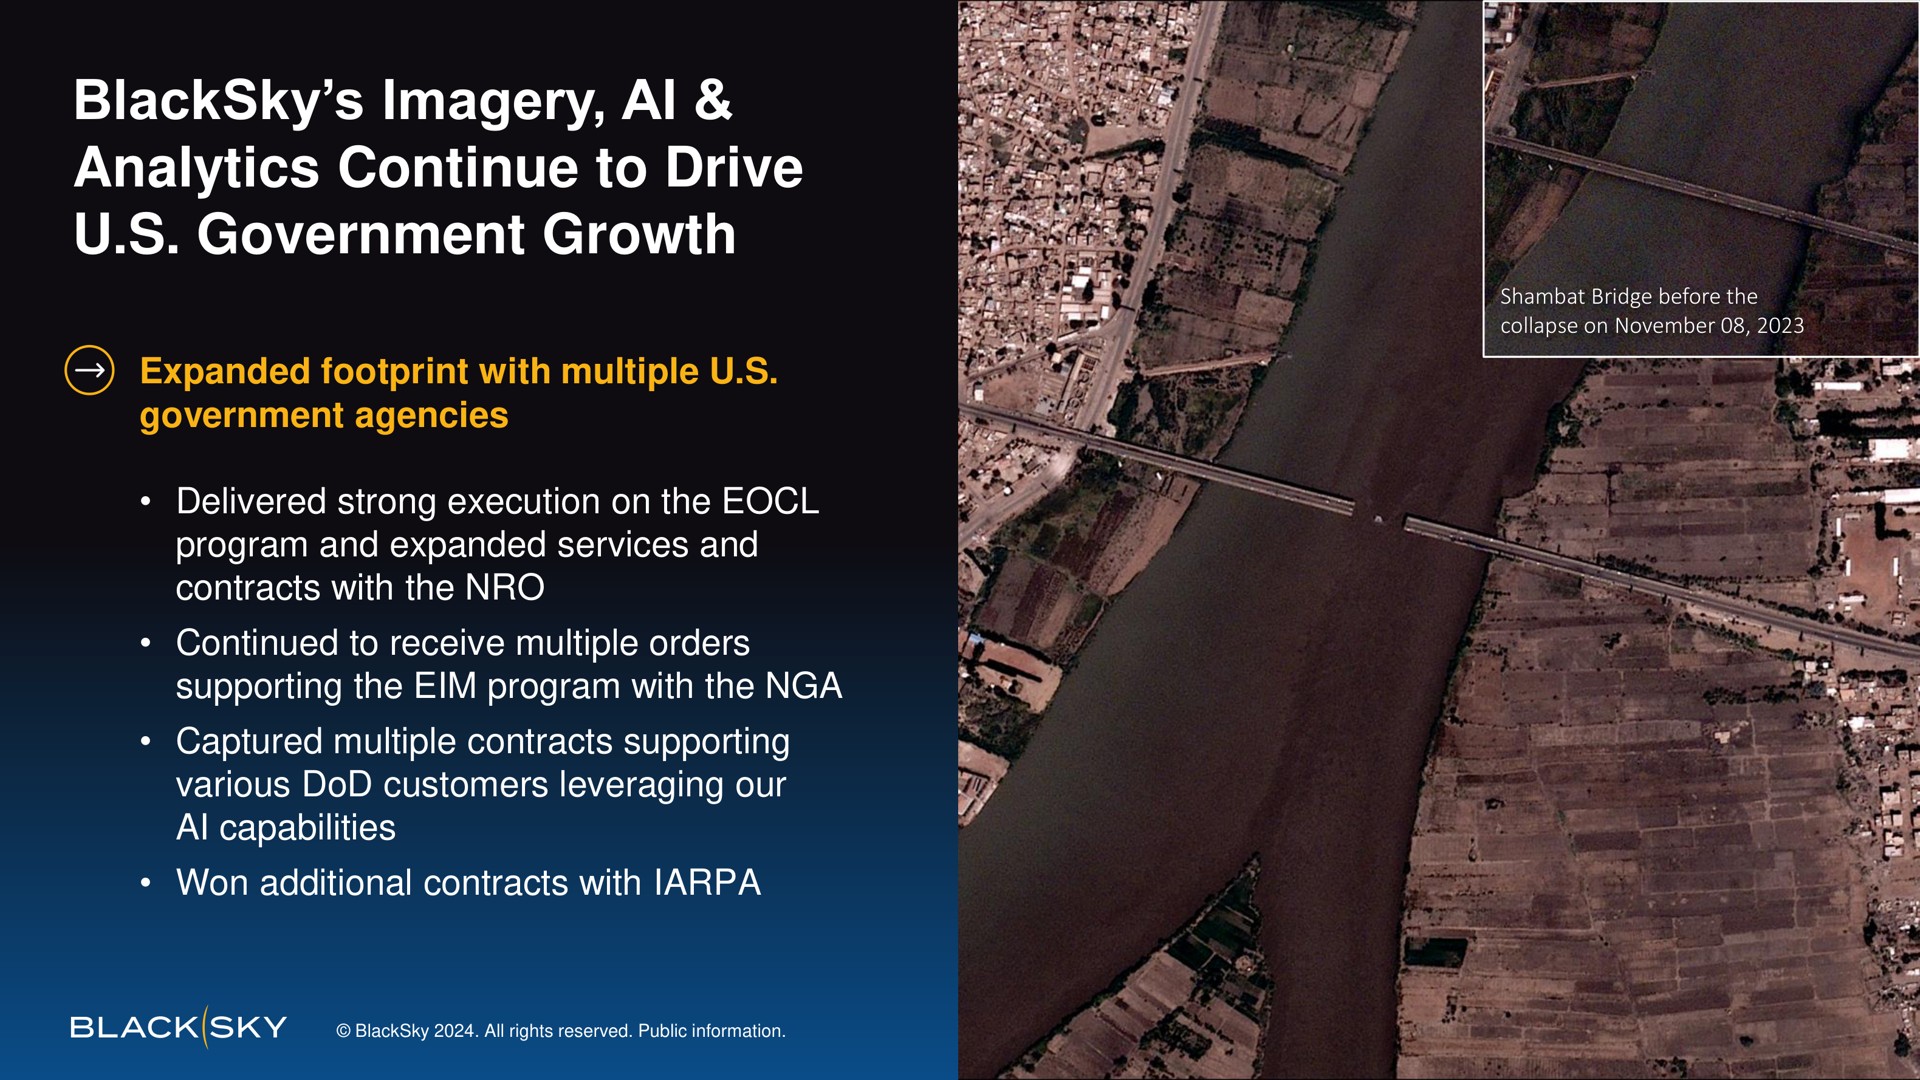 imagery analytics continue to drive government growth | BlackSky